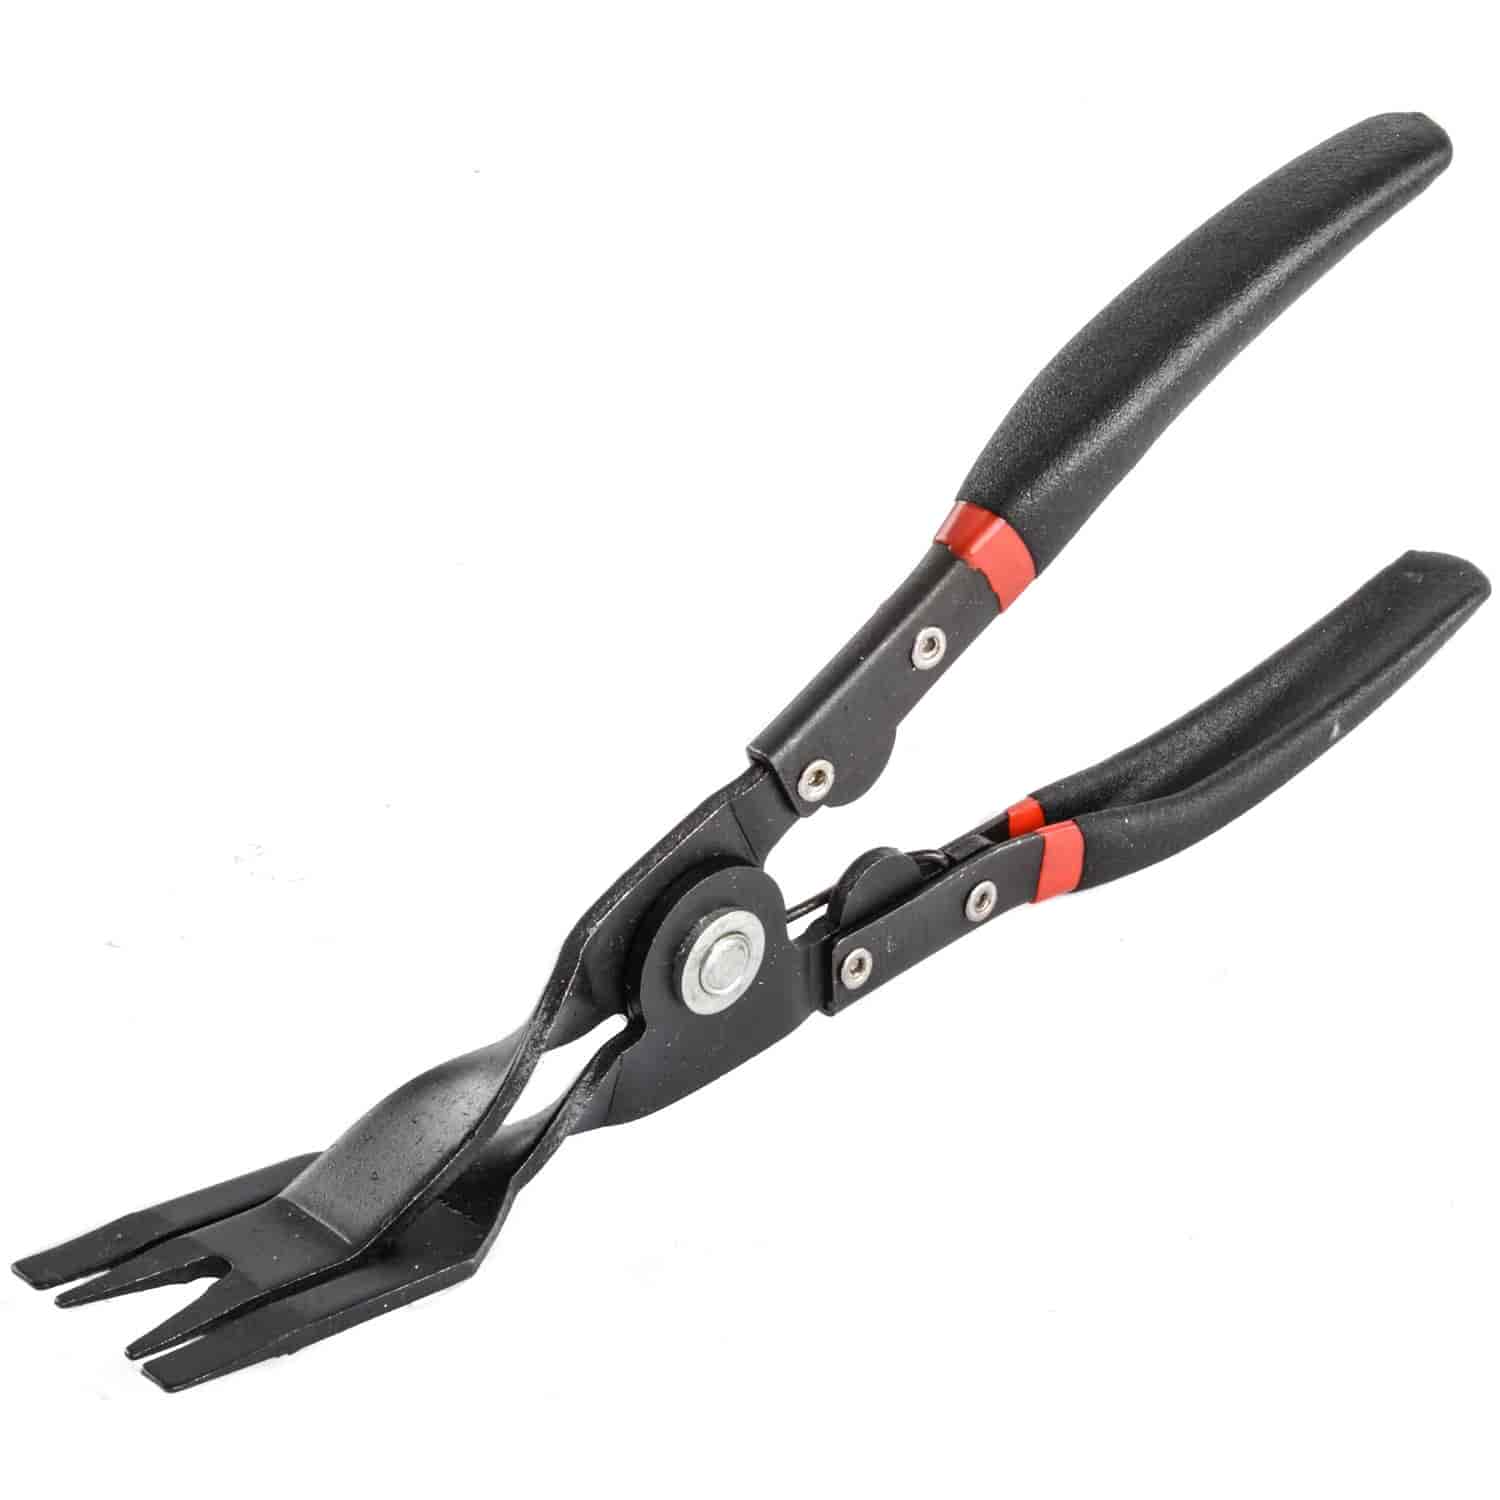 Clip Removal Pliers Removes door upholstery and other trim anchors